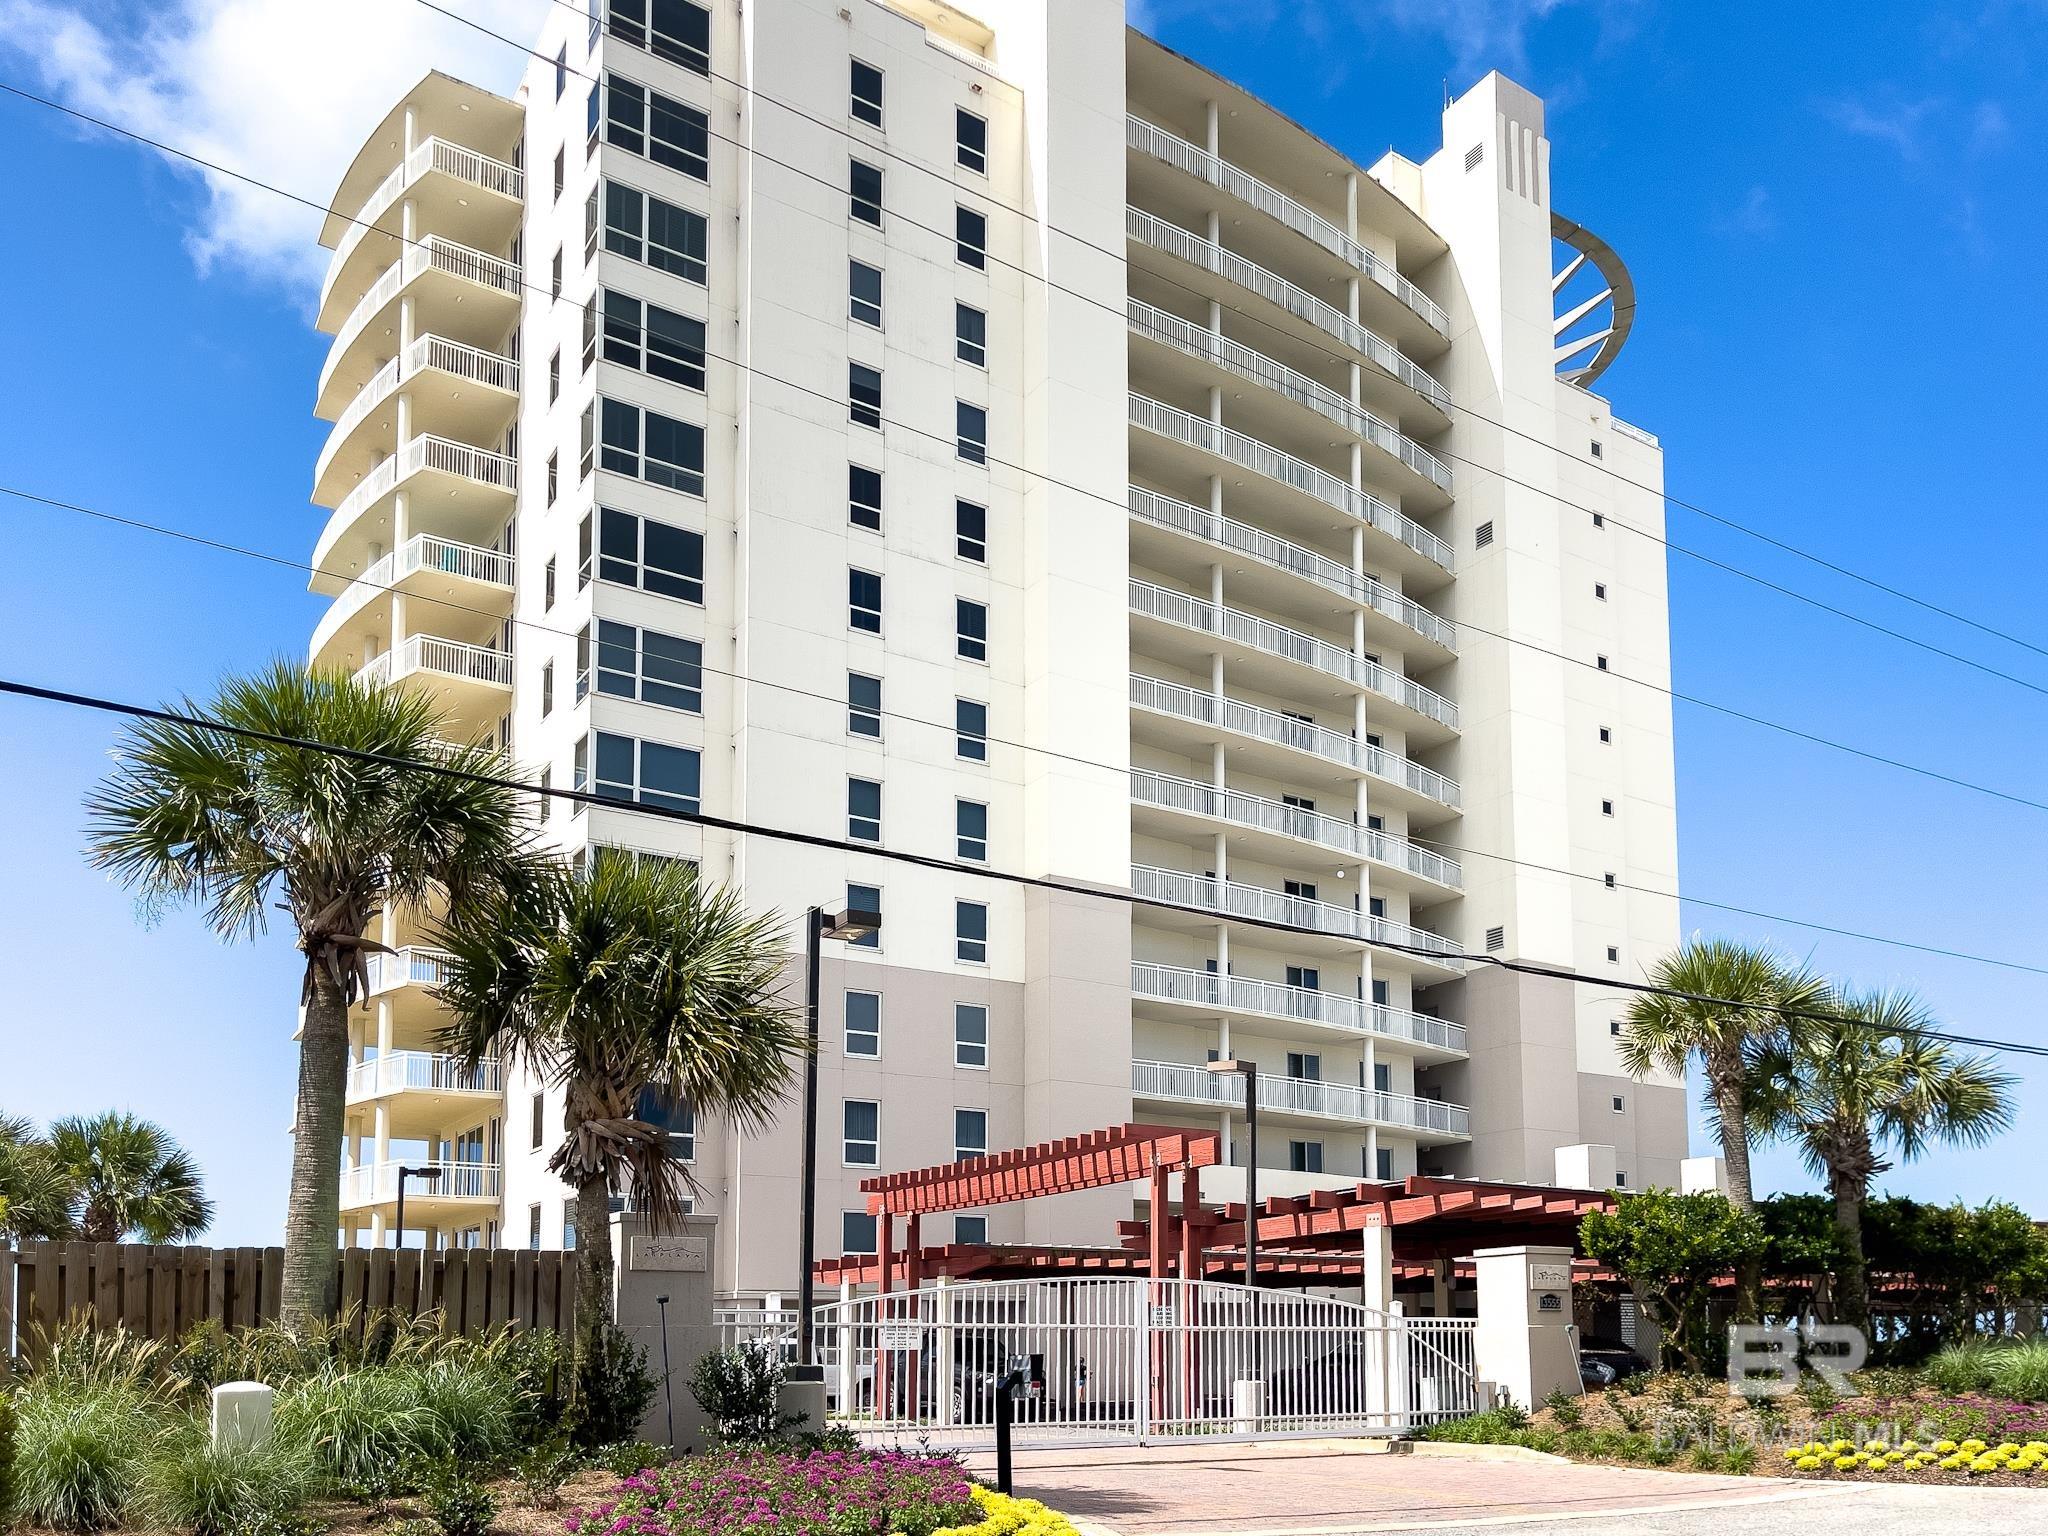 Incredible Opportunity To Own The Entire Top Floor In One Of Perdido Key's Most Sought After Condominiums. The La Playa Penthouse Features Two Living Areas With Panoramic East And West Corner Views. Multiple Balconies To Enjoy And Even A Private 2nd Story Balcony That Is Accessible Via Spiral Staircase. High Ceilings, Large Bedrooms And A Master Bathroom That Has A Huge Walk-In Closet. Updates Include All New Appliances, New Chandeliers, And New Paint Throughout. This Condo Has Never Been Rented And Comes With A Two-Car Garage And A Ground Level Storage Unit. La Playa Has Excellent Amenities Including On-Site Security, An Outdoor Pool And Fitness Center. Schedule Your Showing Today And Come See This Incredible One Of A Kind Property.  ***Seller Will Pay 1 Year Of HOA Dues With An Acceptable Offer***